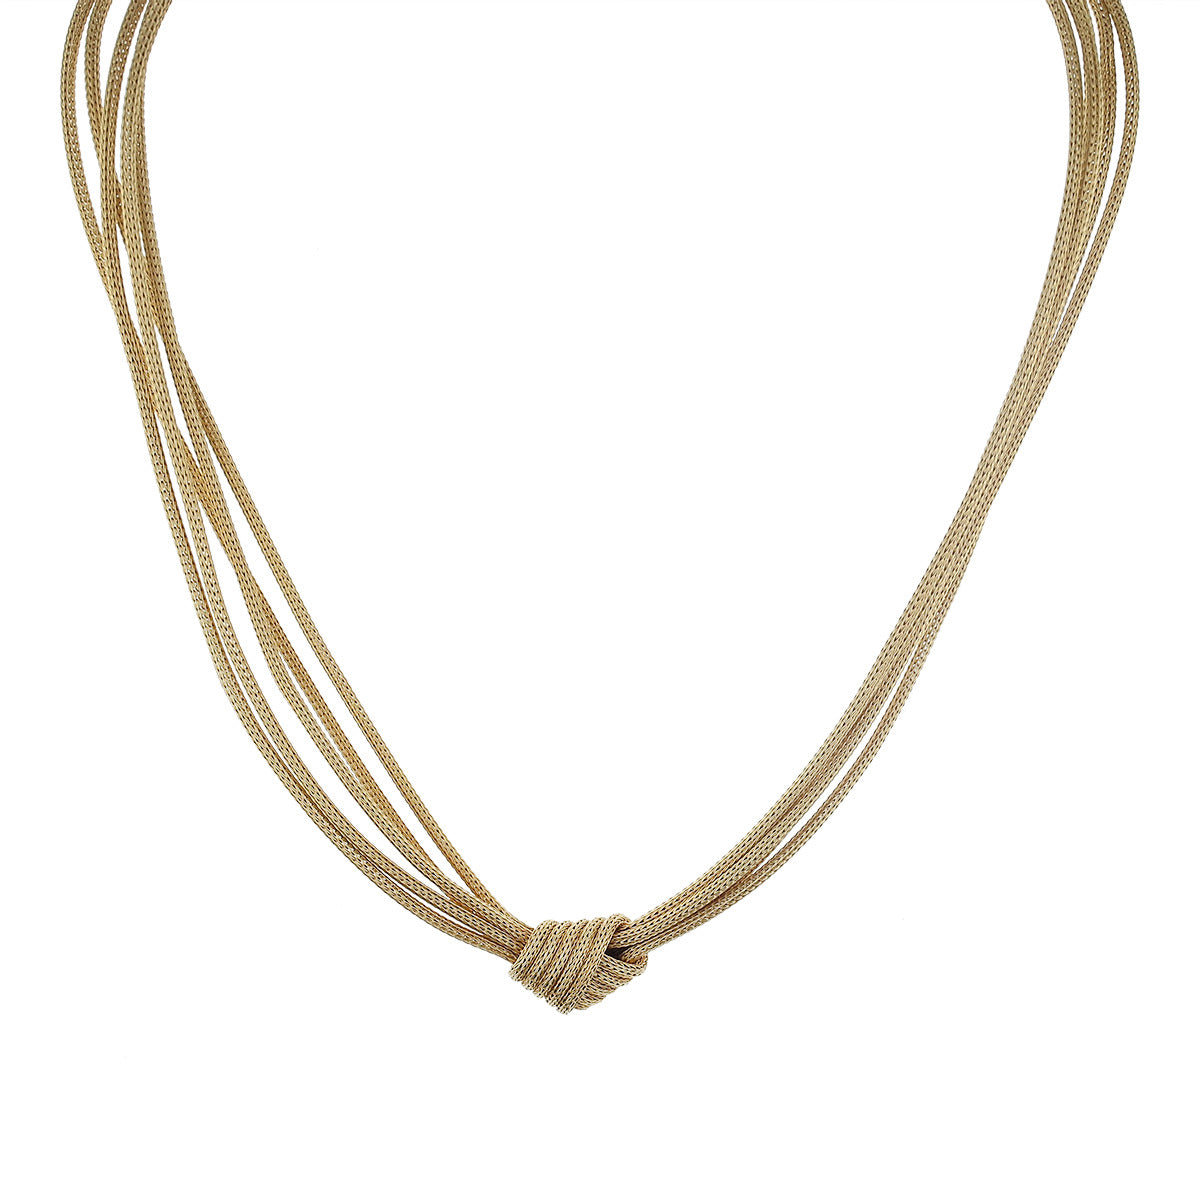 17-Inch 14K Gold 5-Strand Knot Mesh Necklace